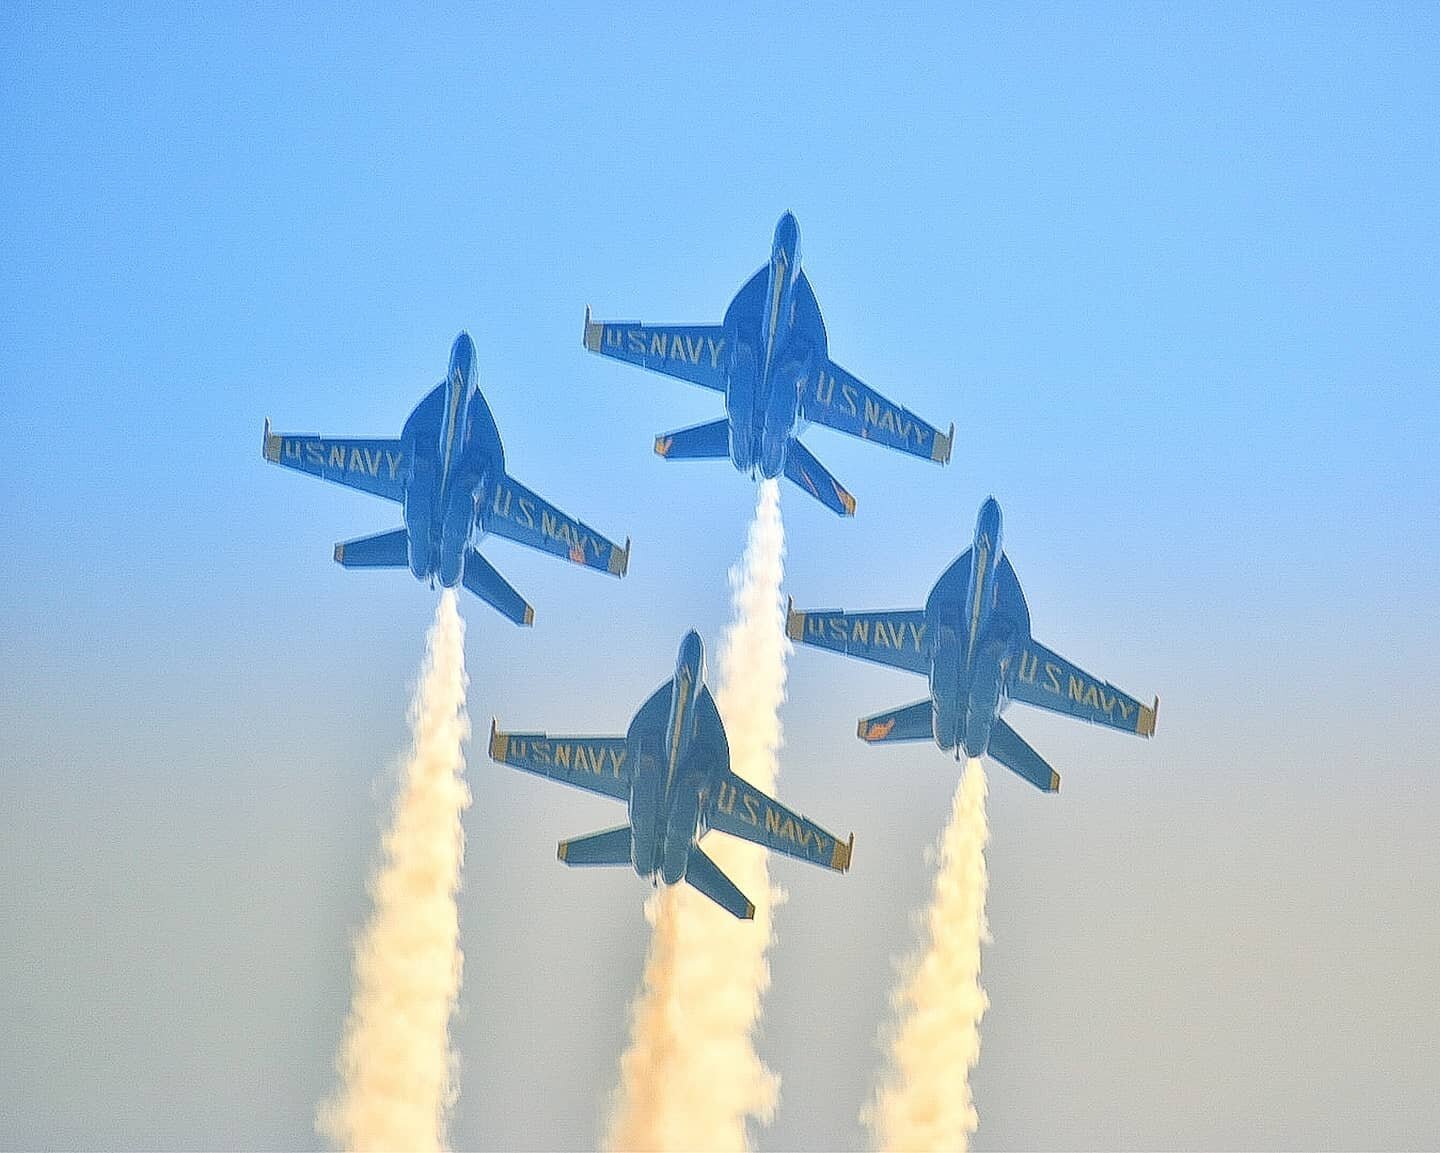 I've hardly gone shooting at all this summer since I've been channeling most of my creative energy toward writing...but I couldn't stop picking up my camera this week. 📸⁣⁣⁣⁣⁣⁣
⁣⁣⁣⁣⁣⁣⁣⁣⁣⁣
Special thanks to the @usnavyblueangels for putting on a fabul